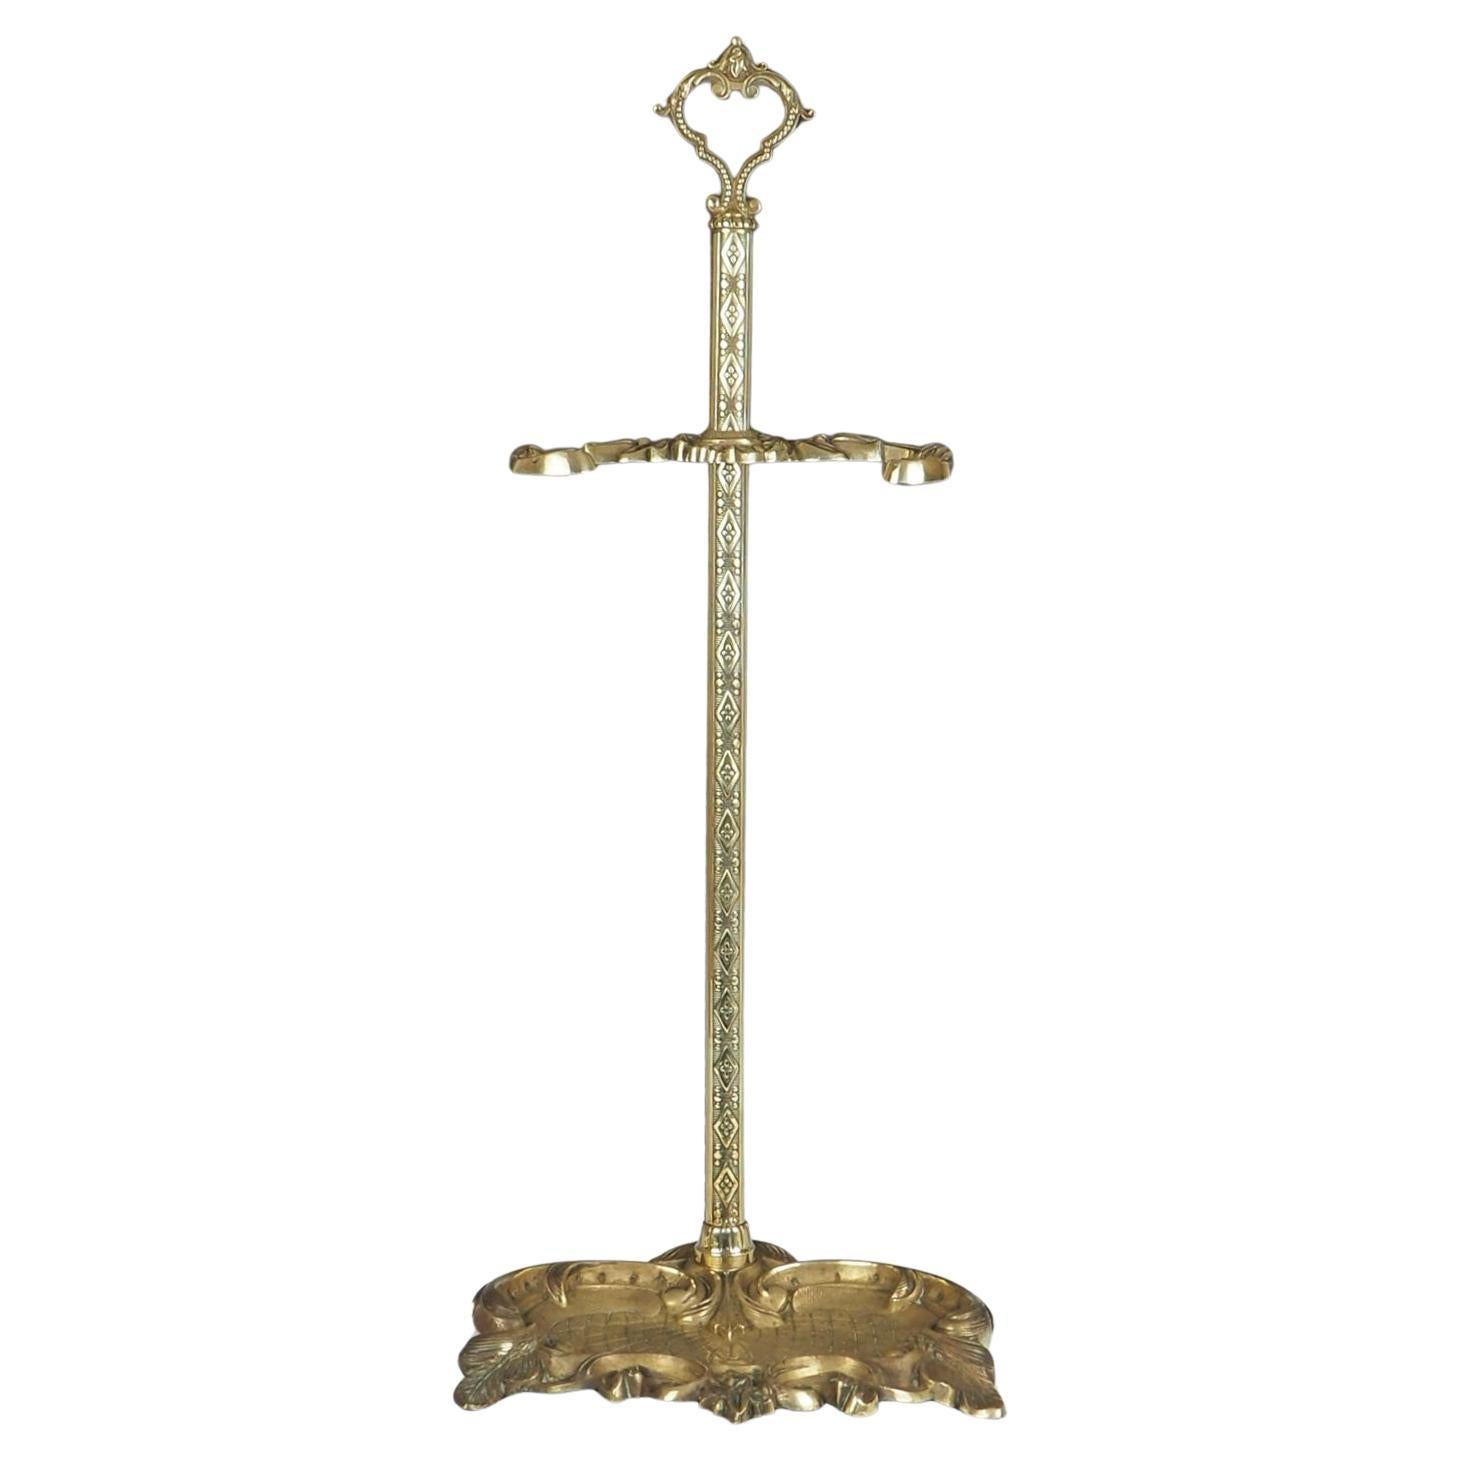 Antique Rococo Revival Brass Fireside Tool Stand For Sale